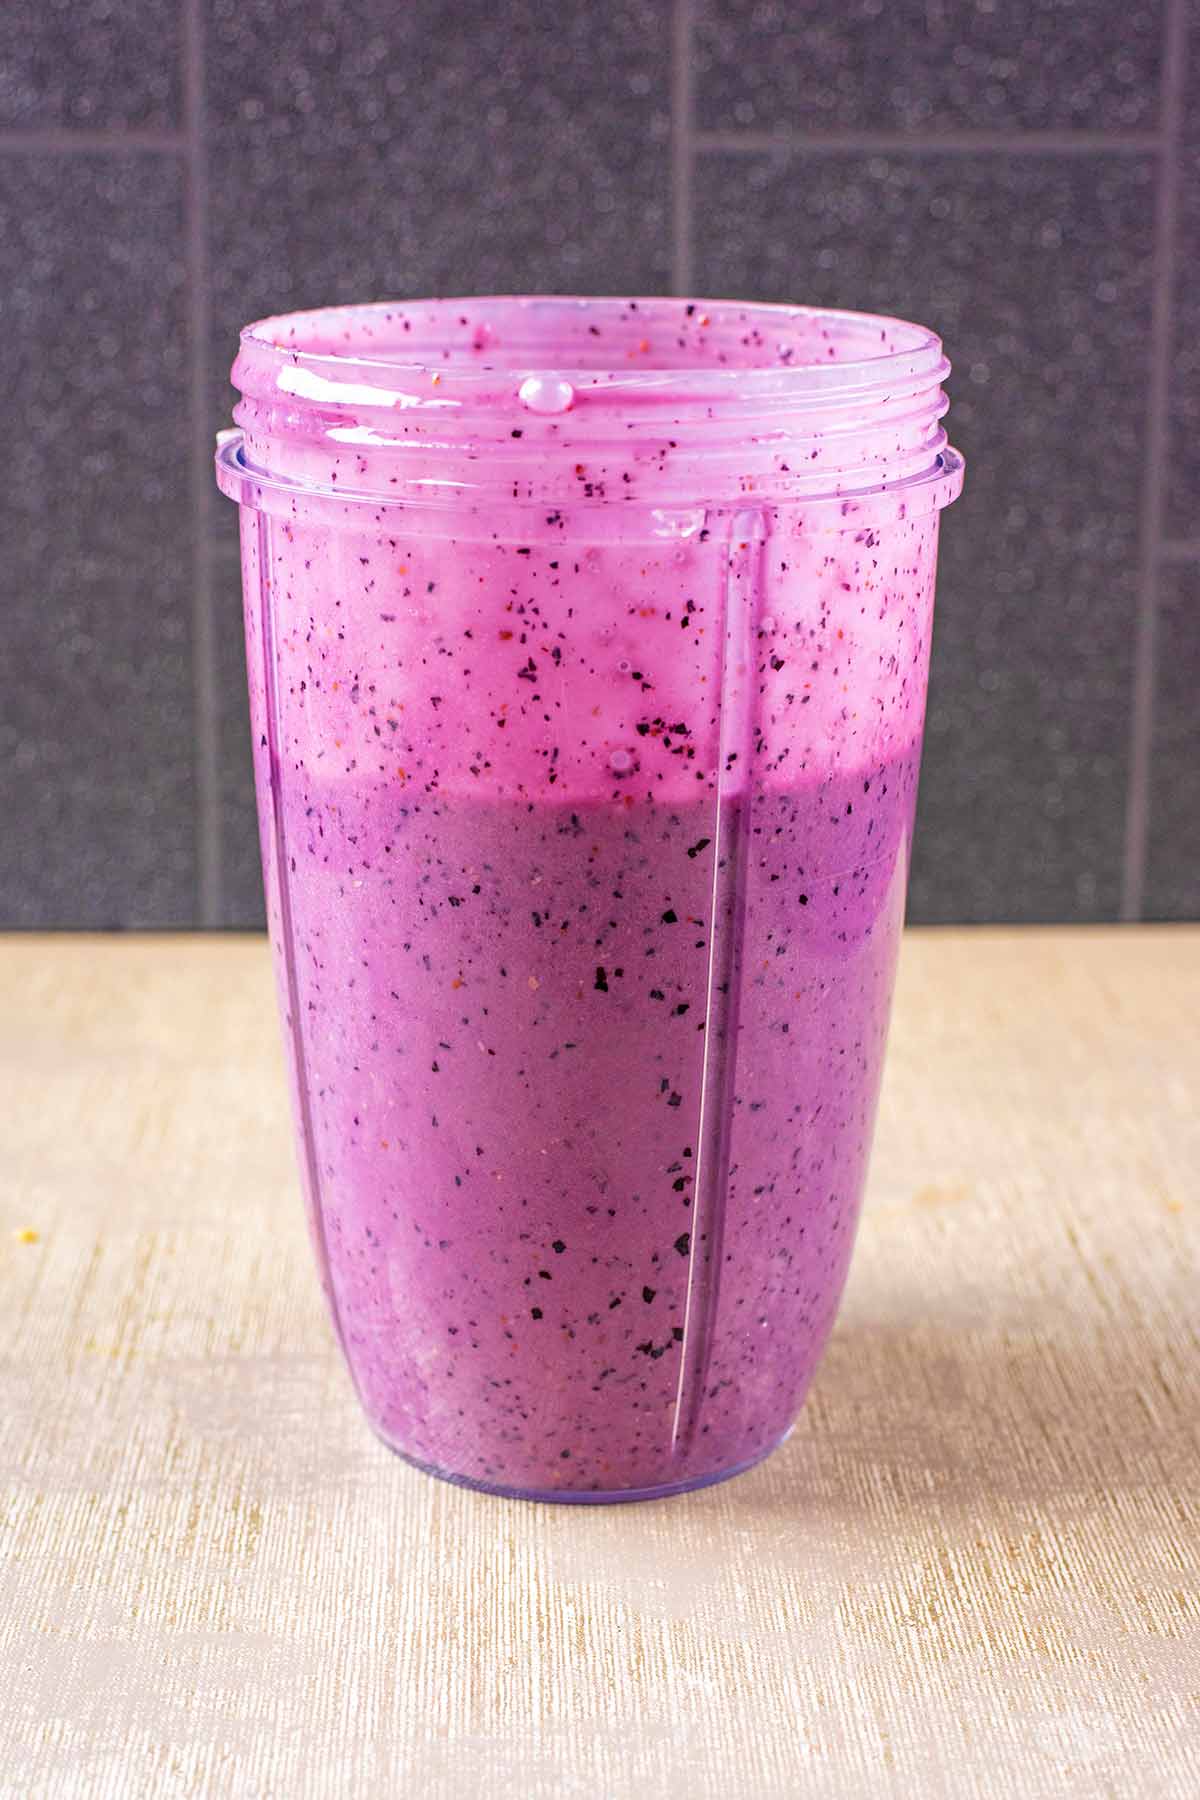 A purple coloured smoothie in a blender jug.